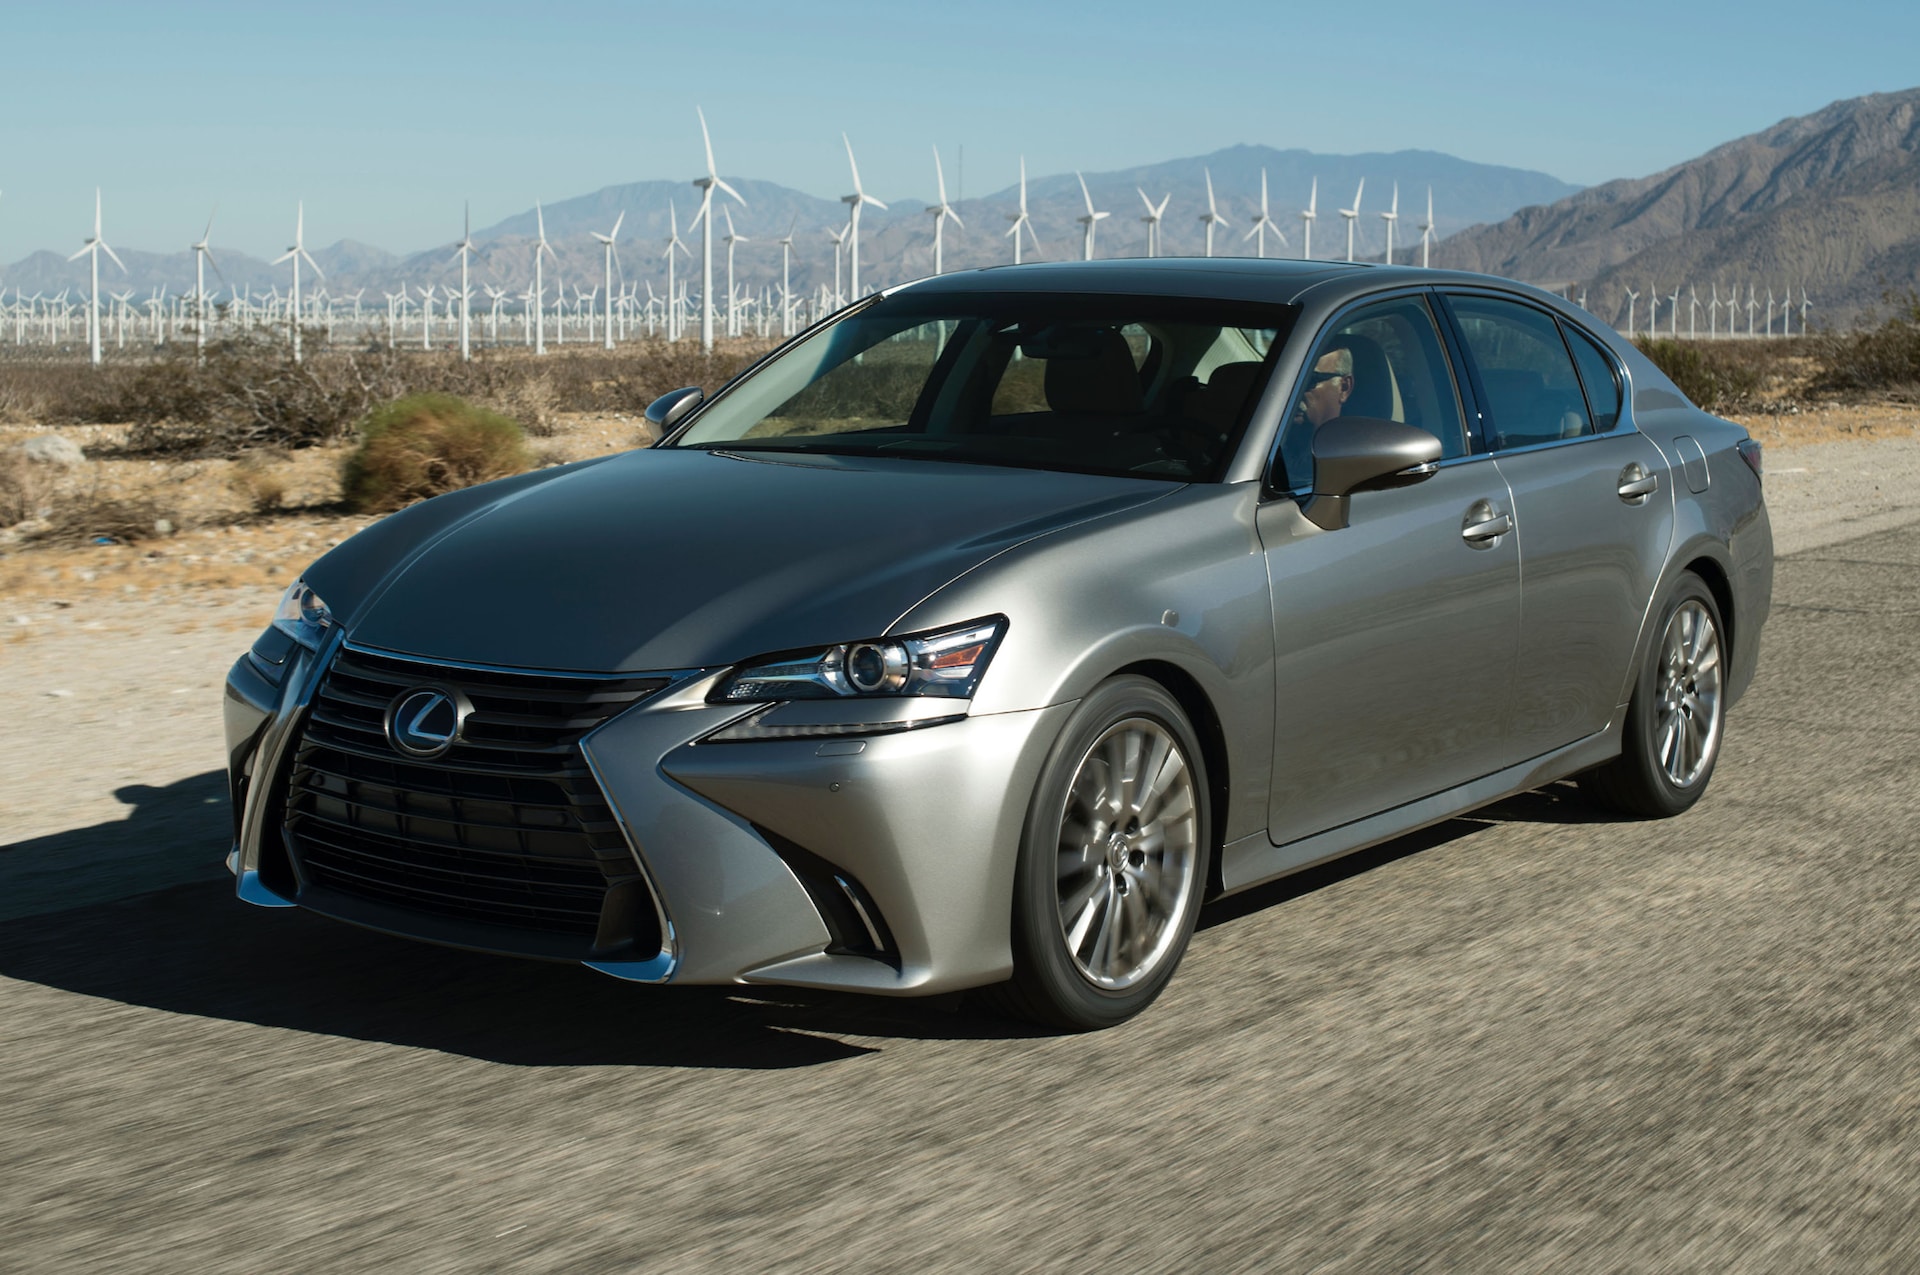 2016 Lexus GS 200t First Drive Review